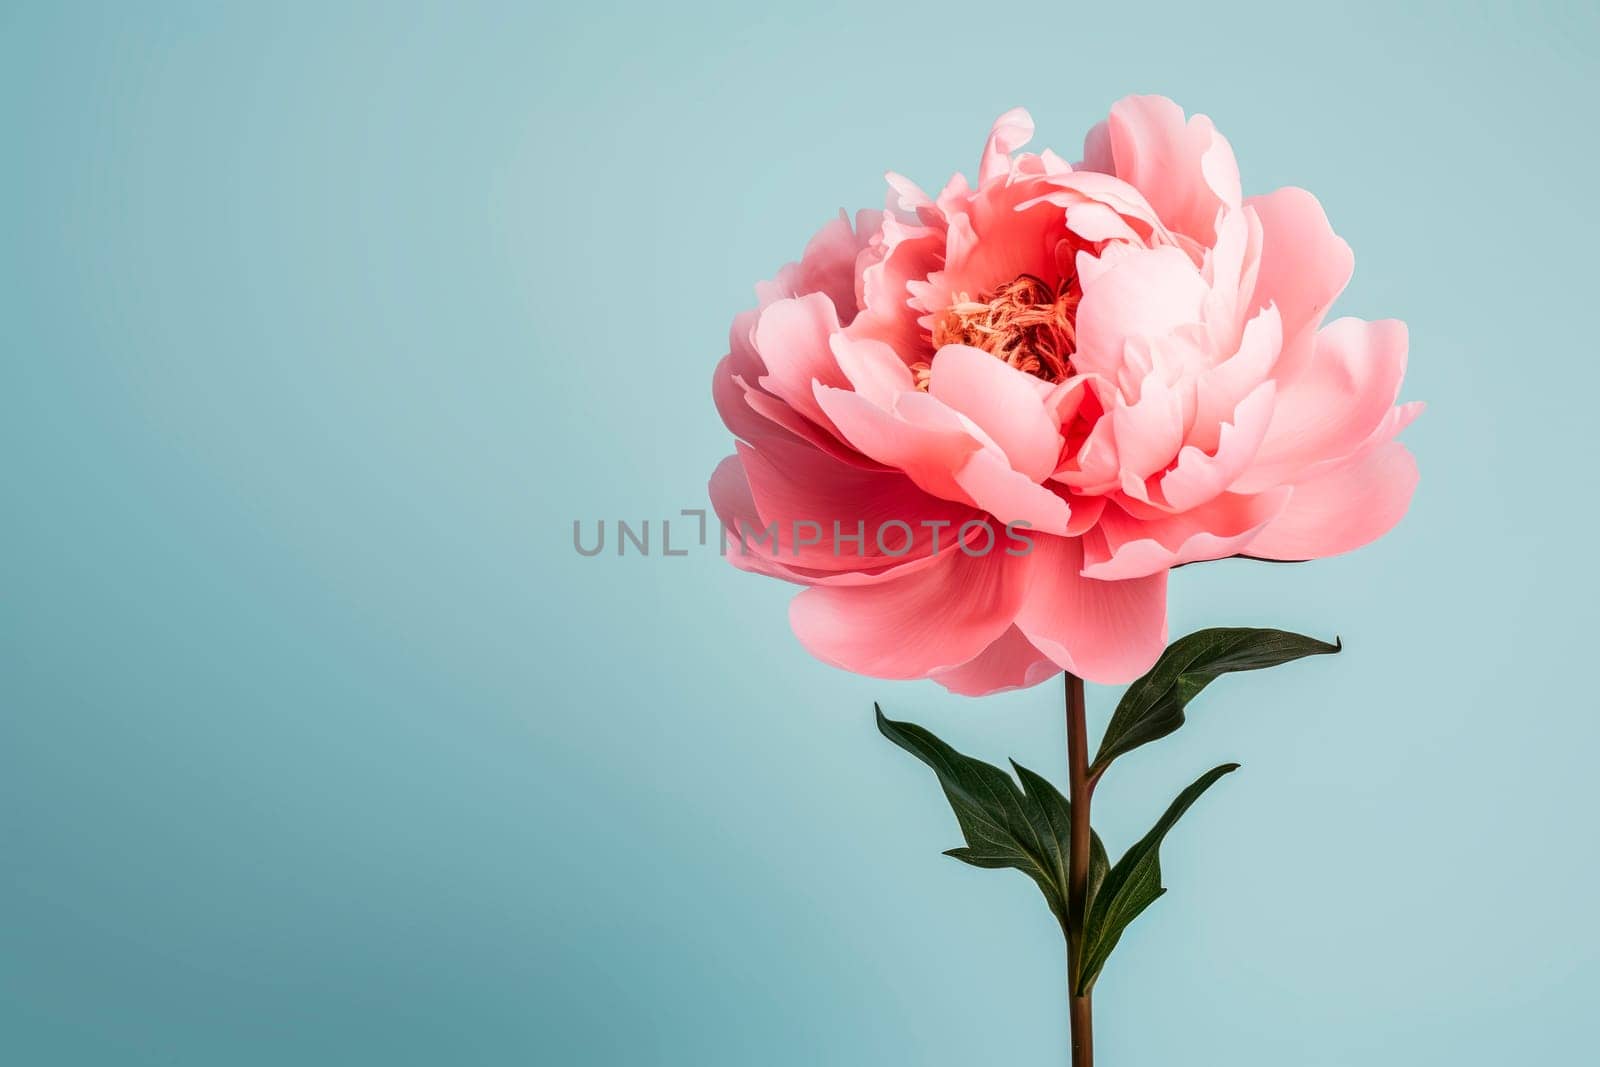 A peony flower on a background with a copyspace. Minimalism.